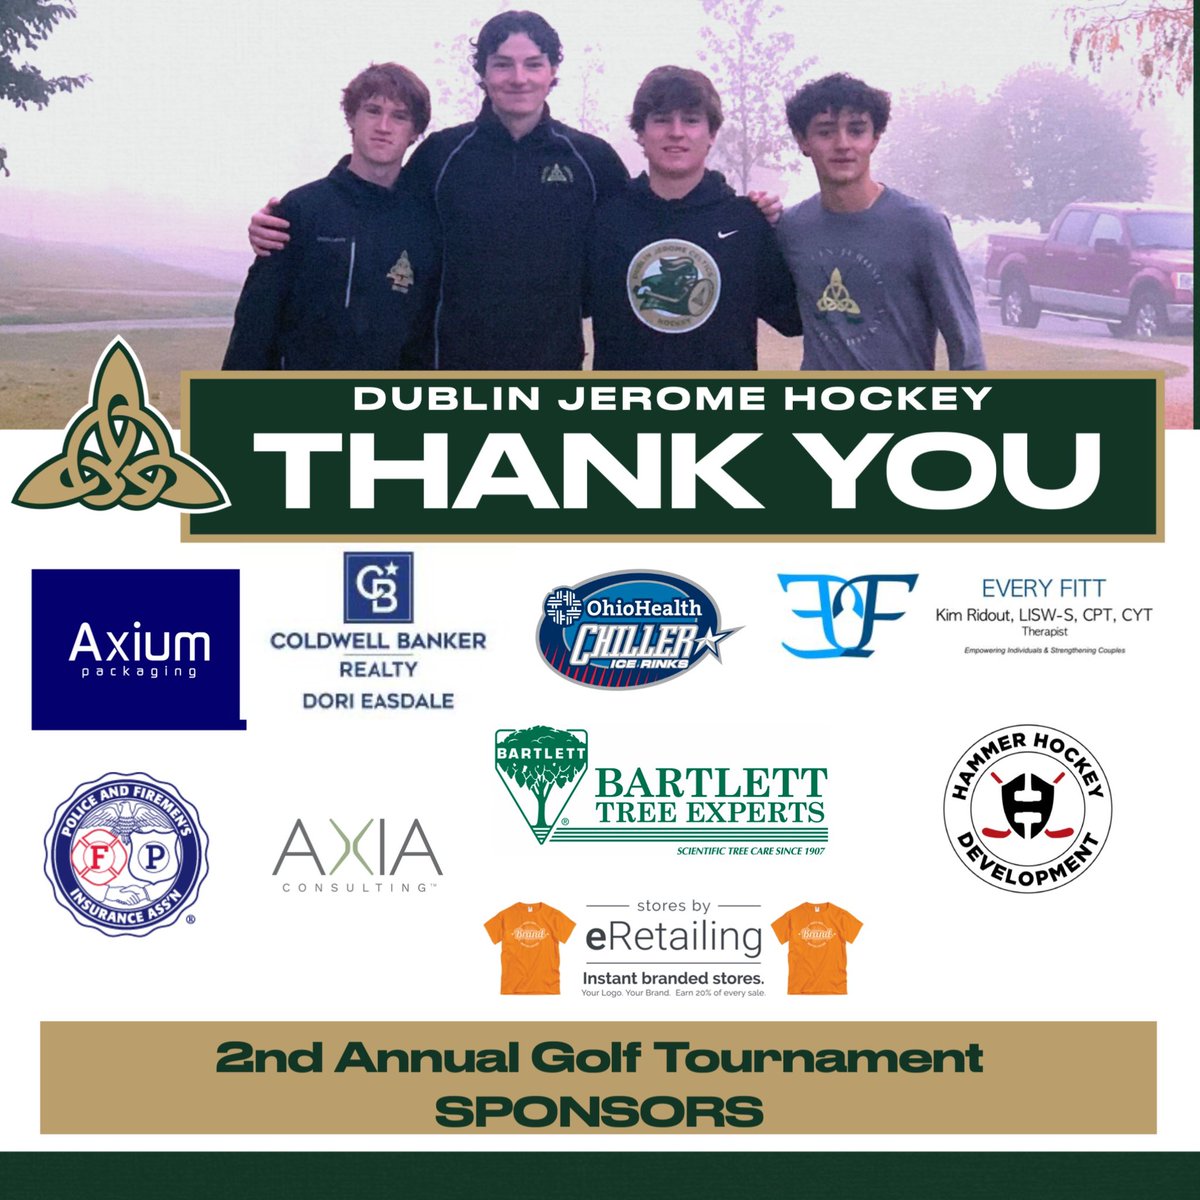 We close out our week of thanks with this wonderful group of sponsors! Each of the sponsors highlighted today and earlier this week have contributed to our Jerome Hockey community. THANK YOU!